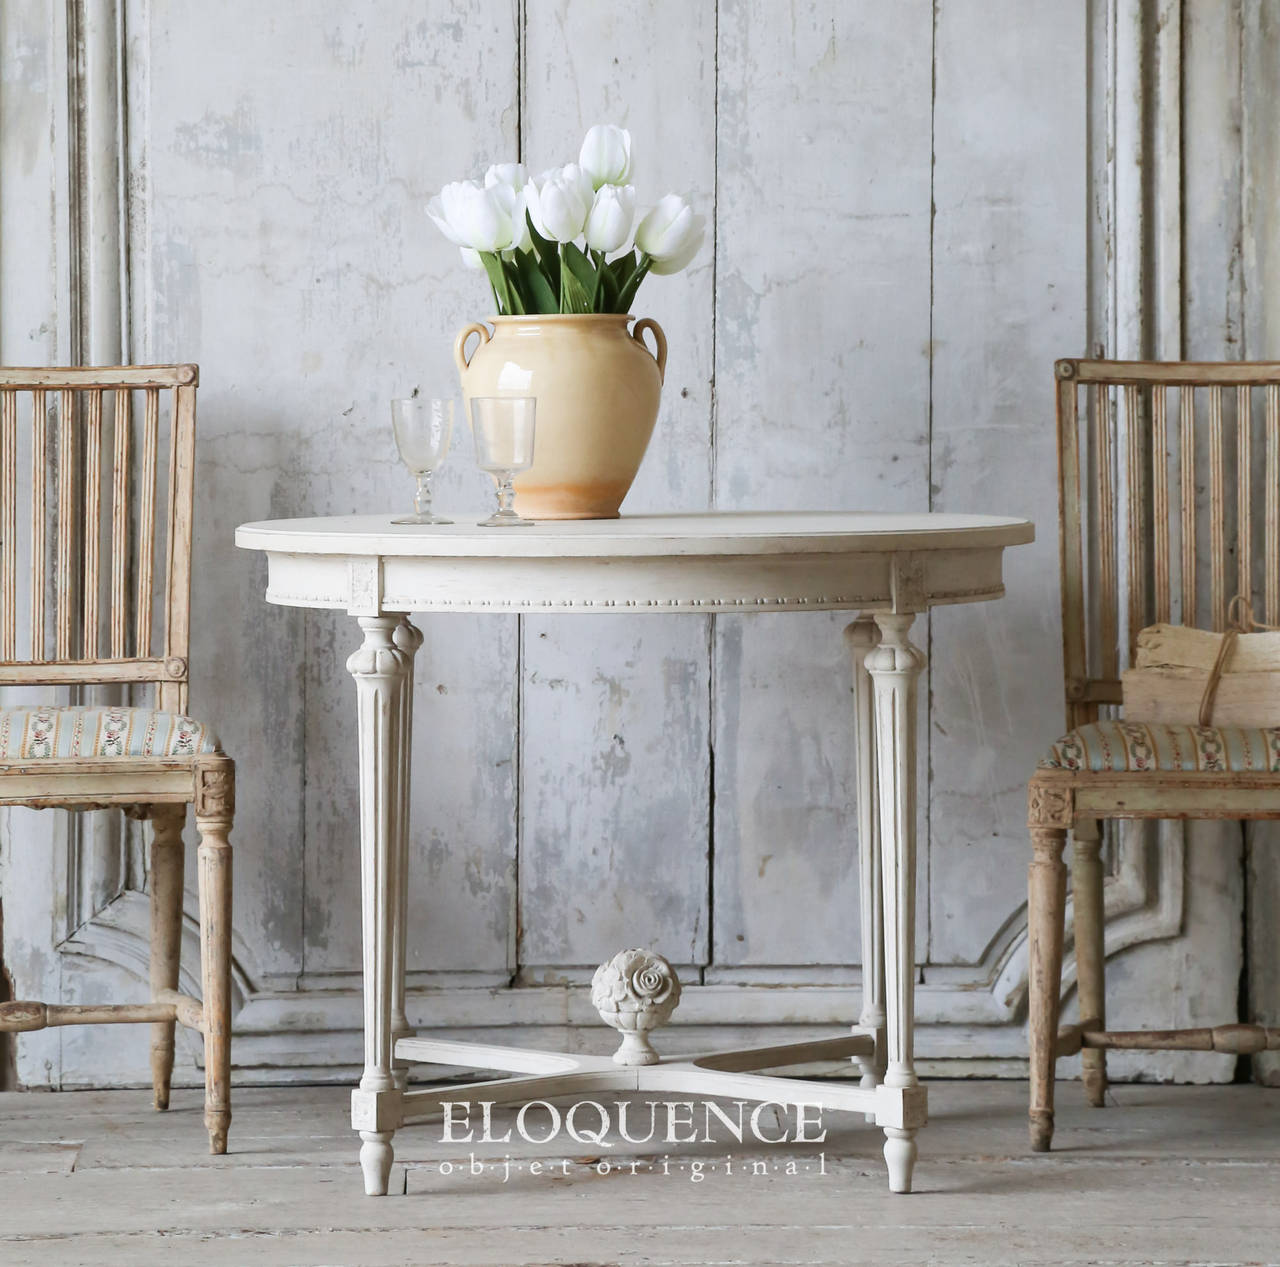 Delightful Swedish antique occasional table finished in a lovely eggshell finish. The stretcher is topped by a beautiful bouquet carving and the fluted Louis XVI style legs rise delicately to the round table top.